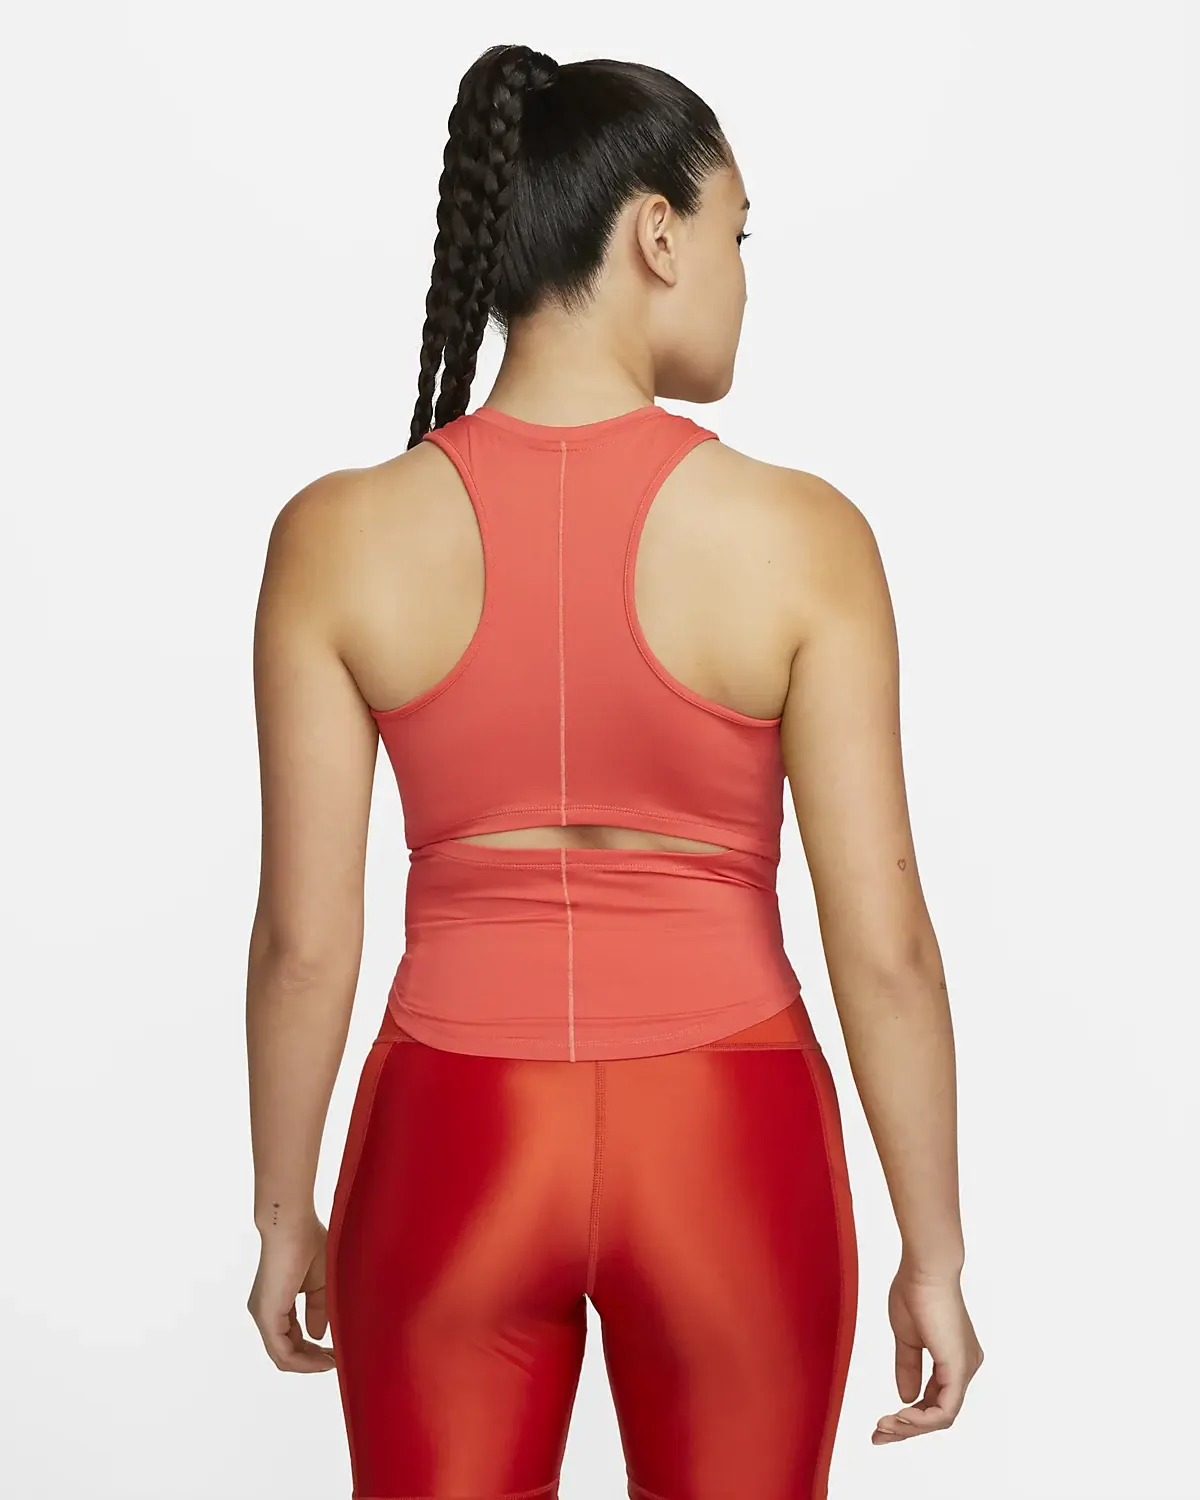 Nike Dri-FIT One Luxe. 1